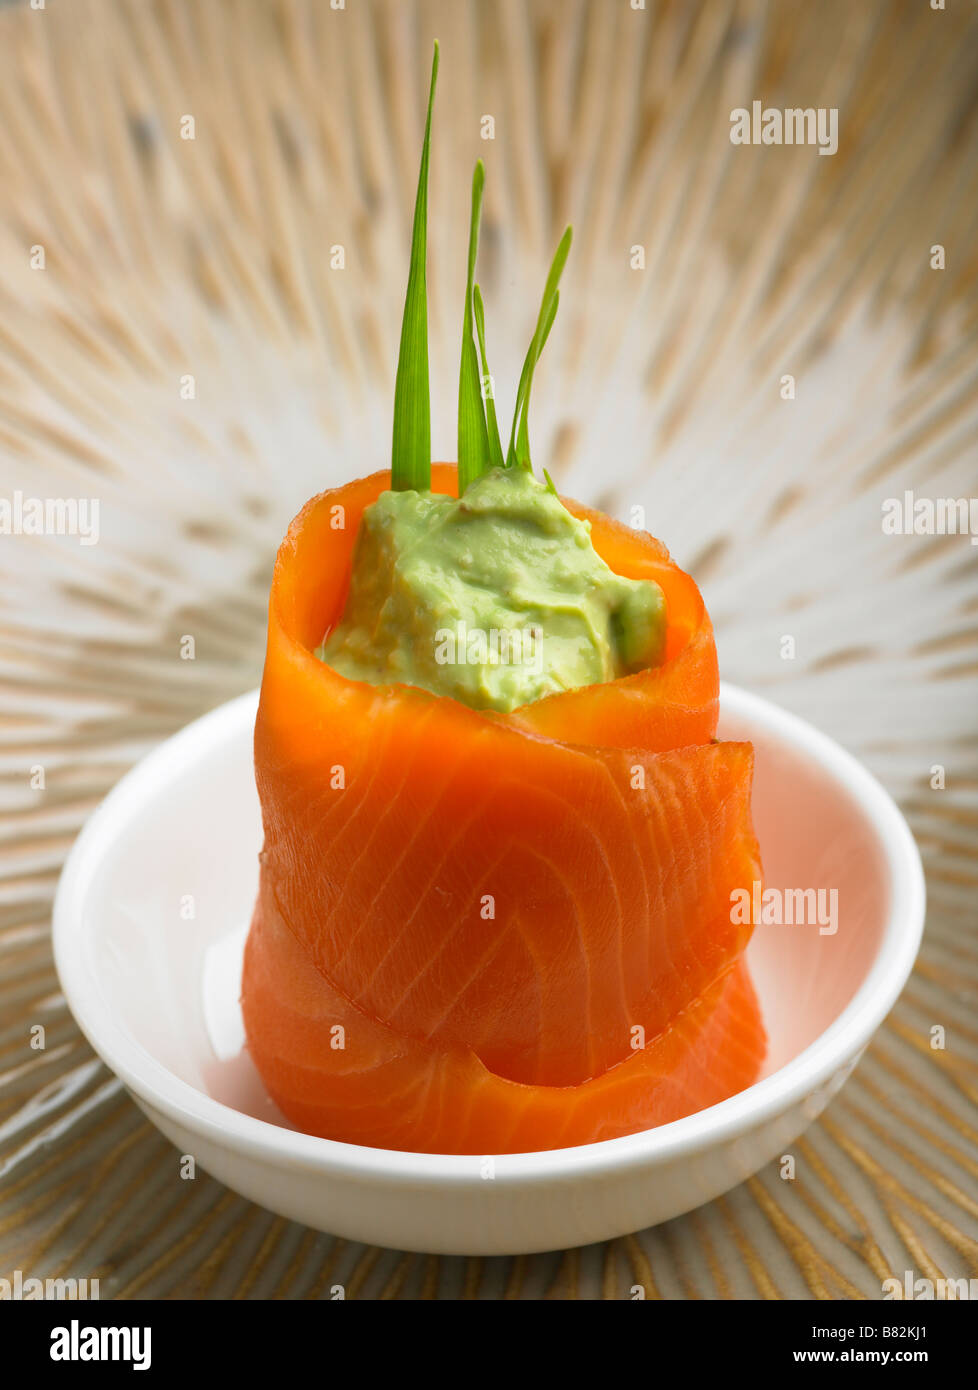 smoked salmon and avocado hors d oeuvre Stock Photo